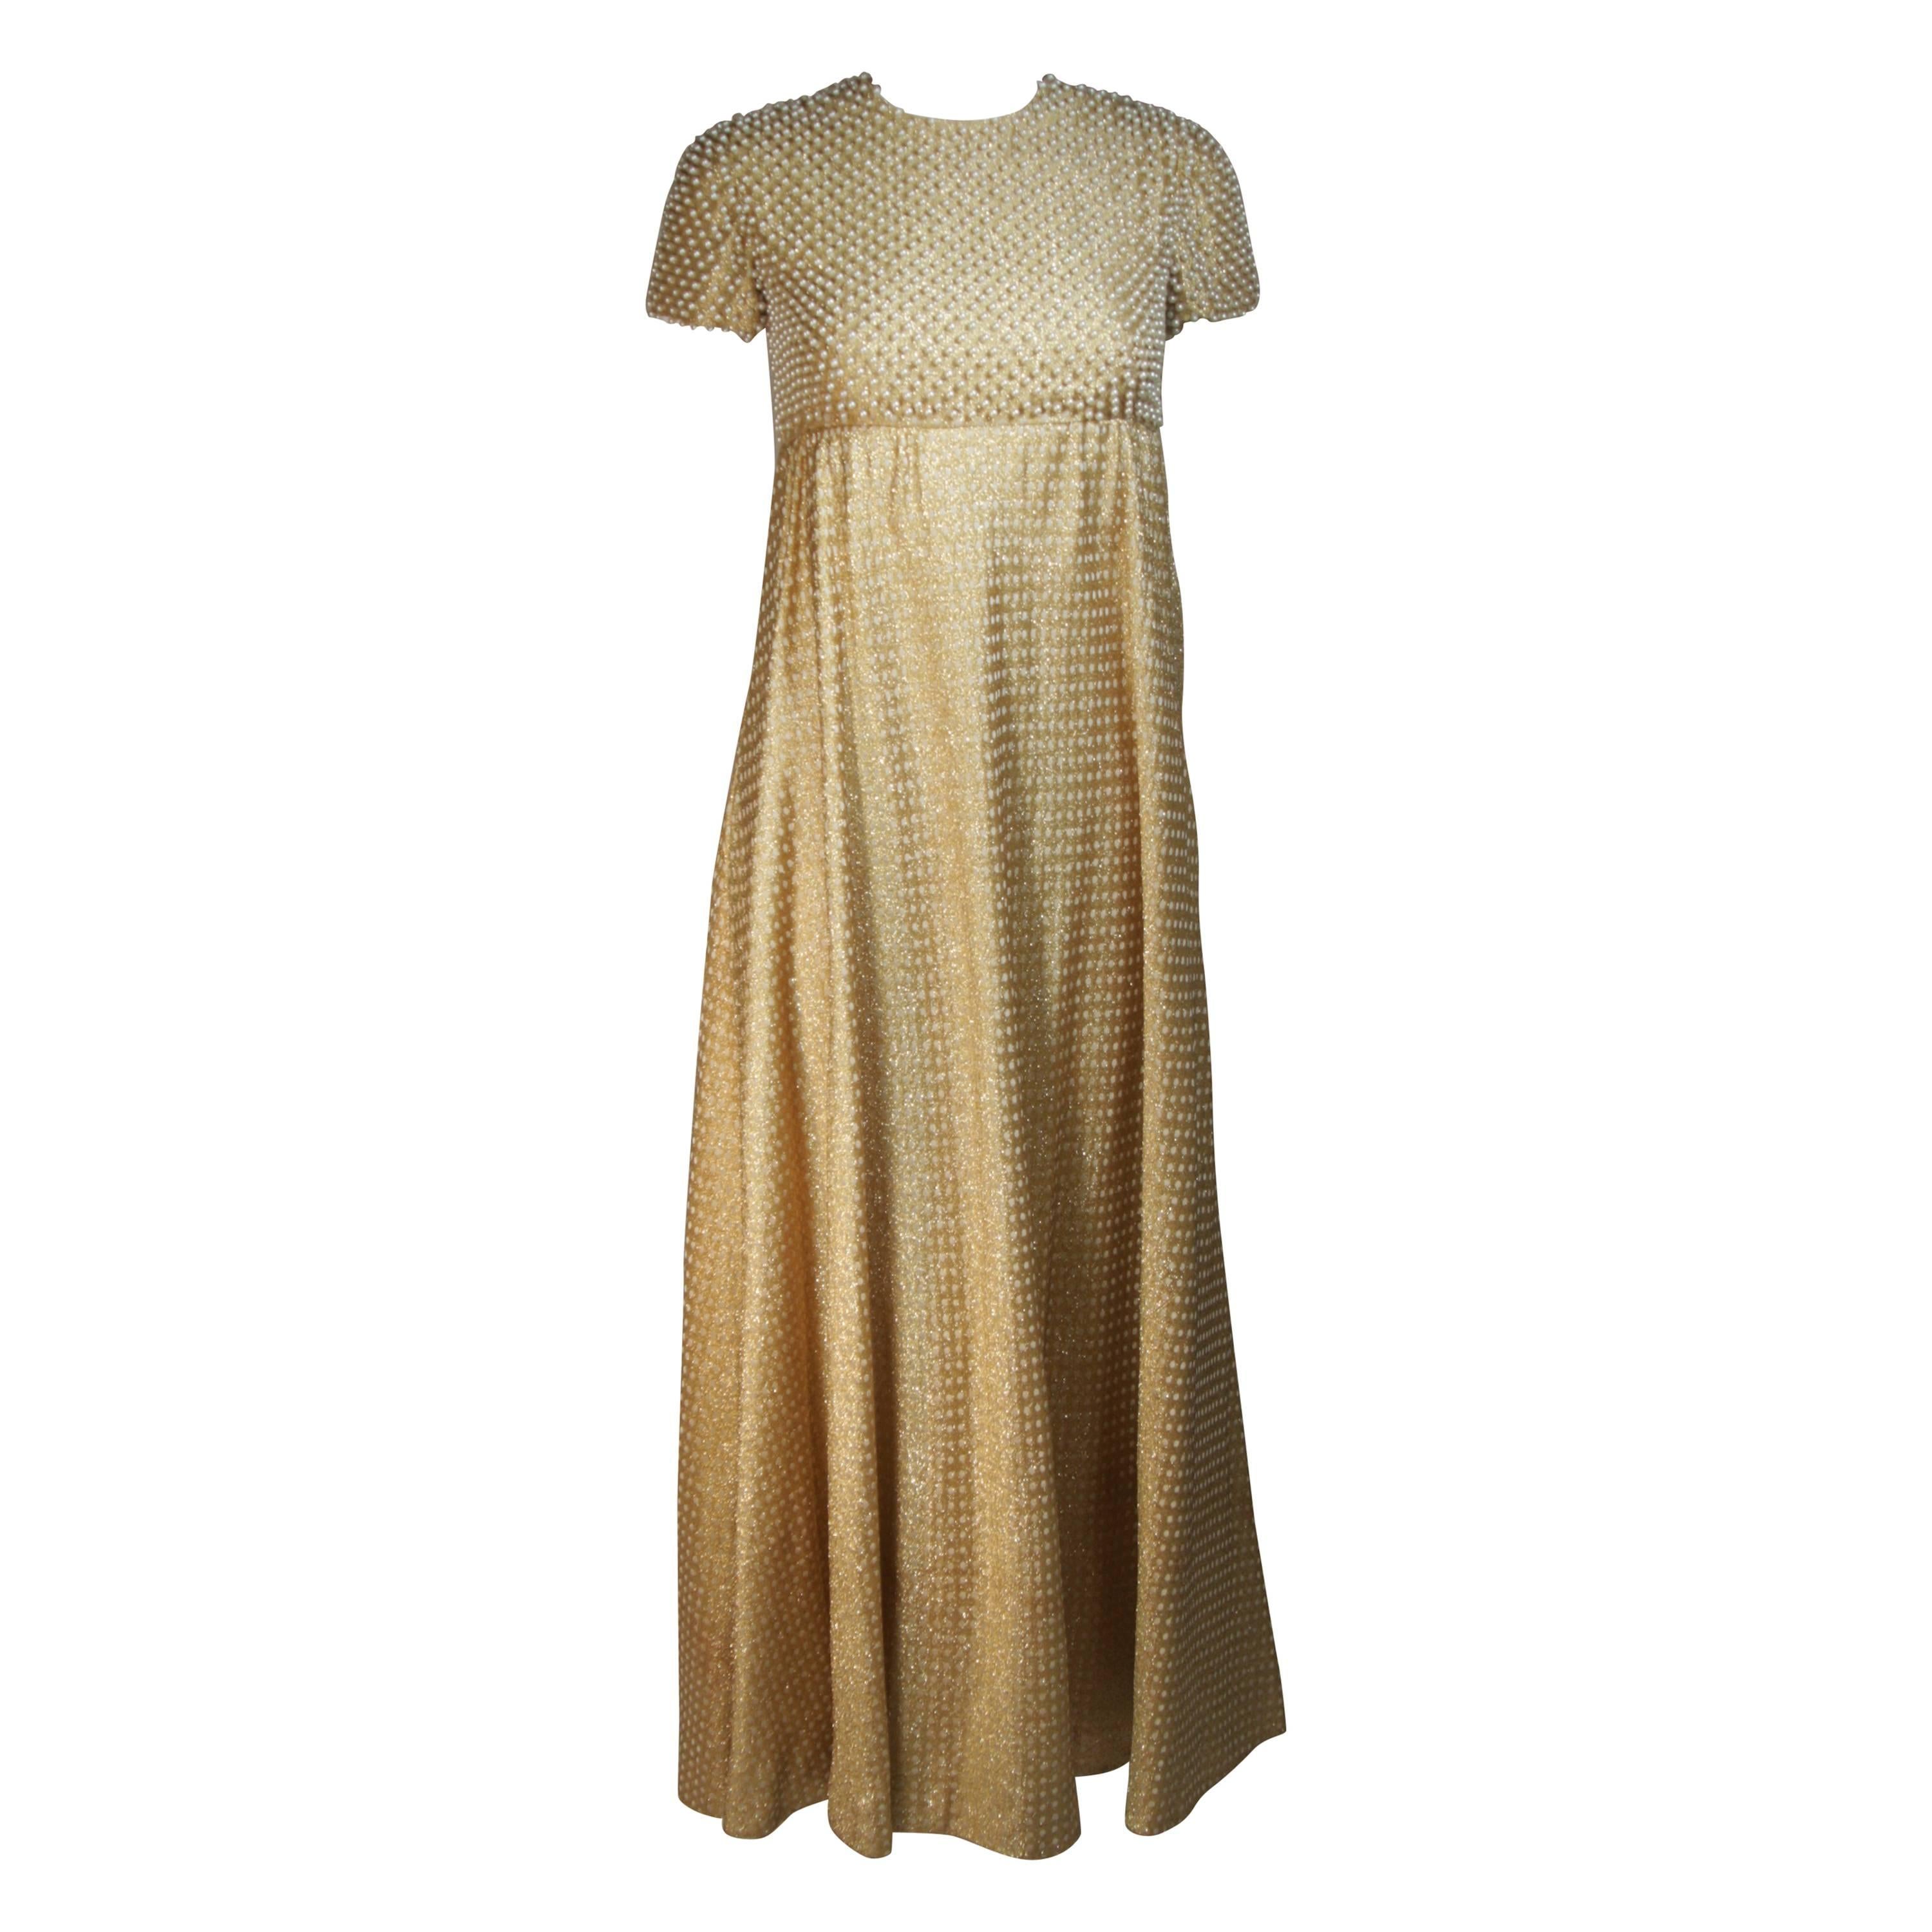 GEOFFREY BEENE 1960's Gold Lame Pearl Bodice Baby Doll Gown Size 2-4 For Sale